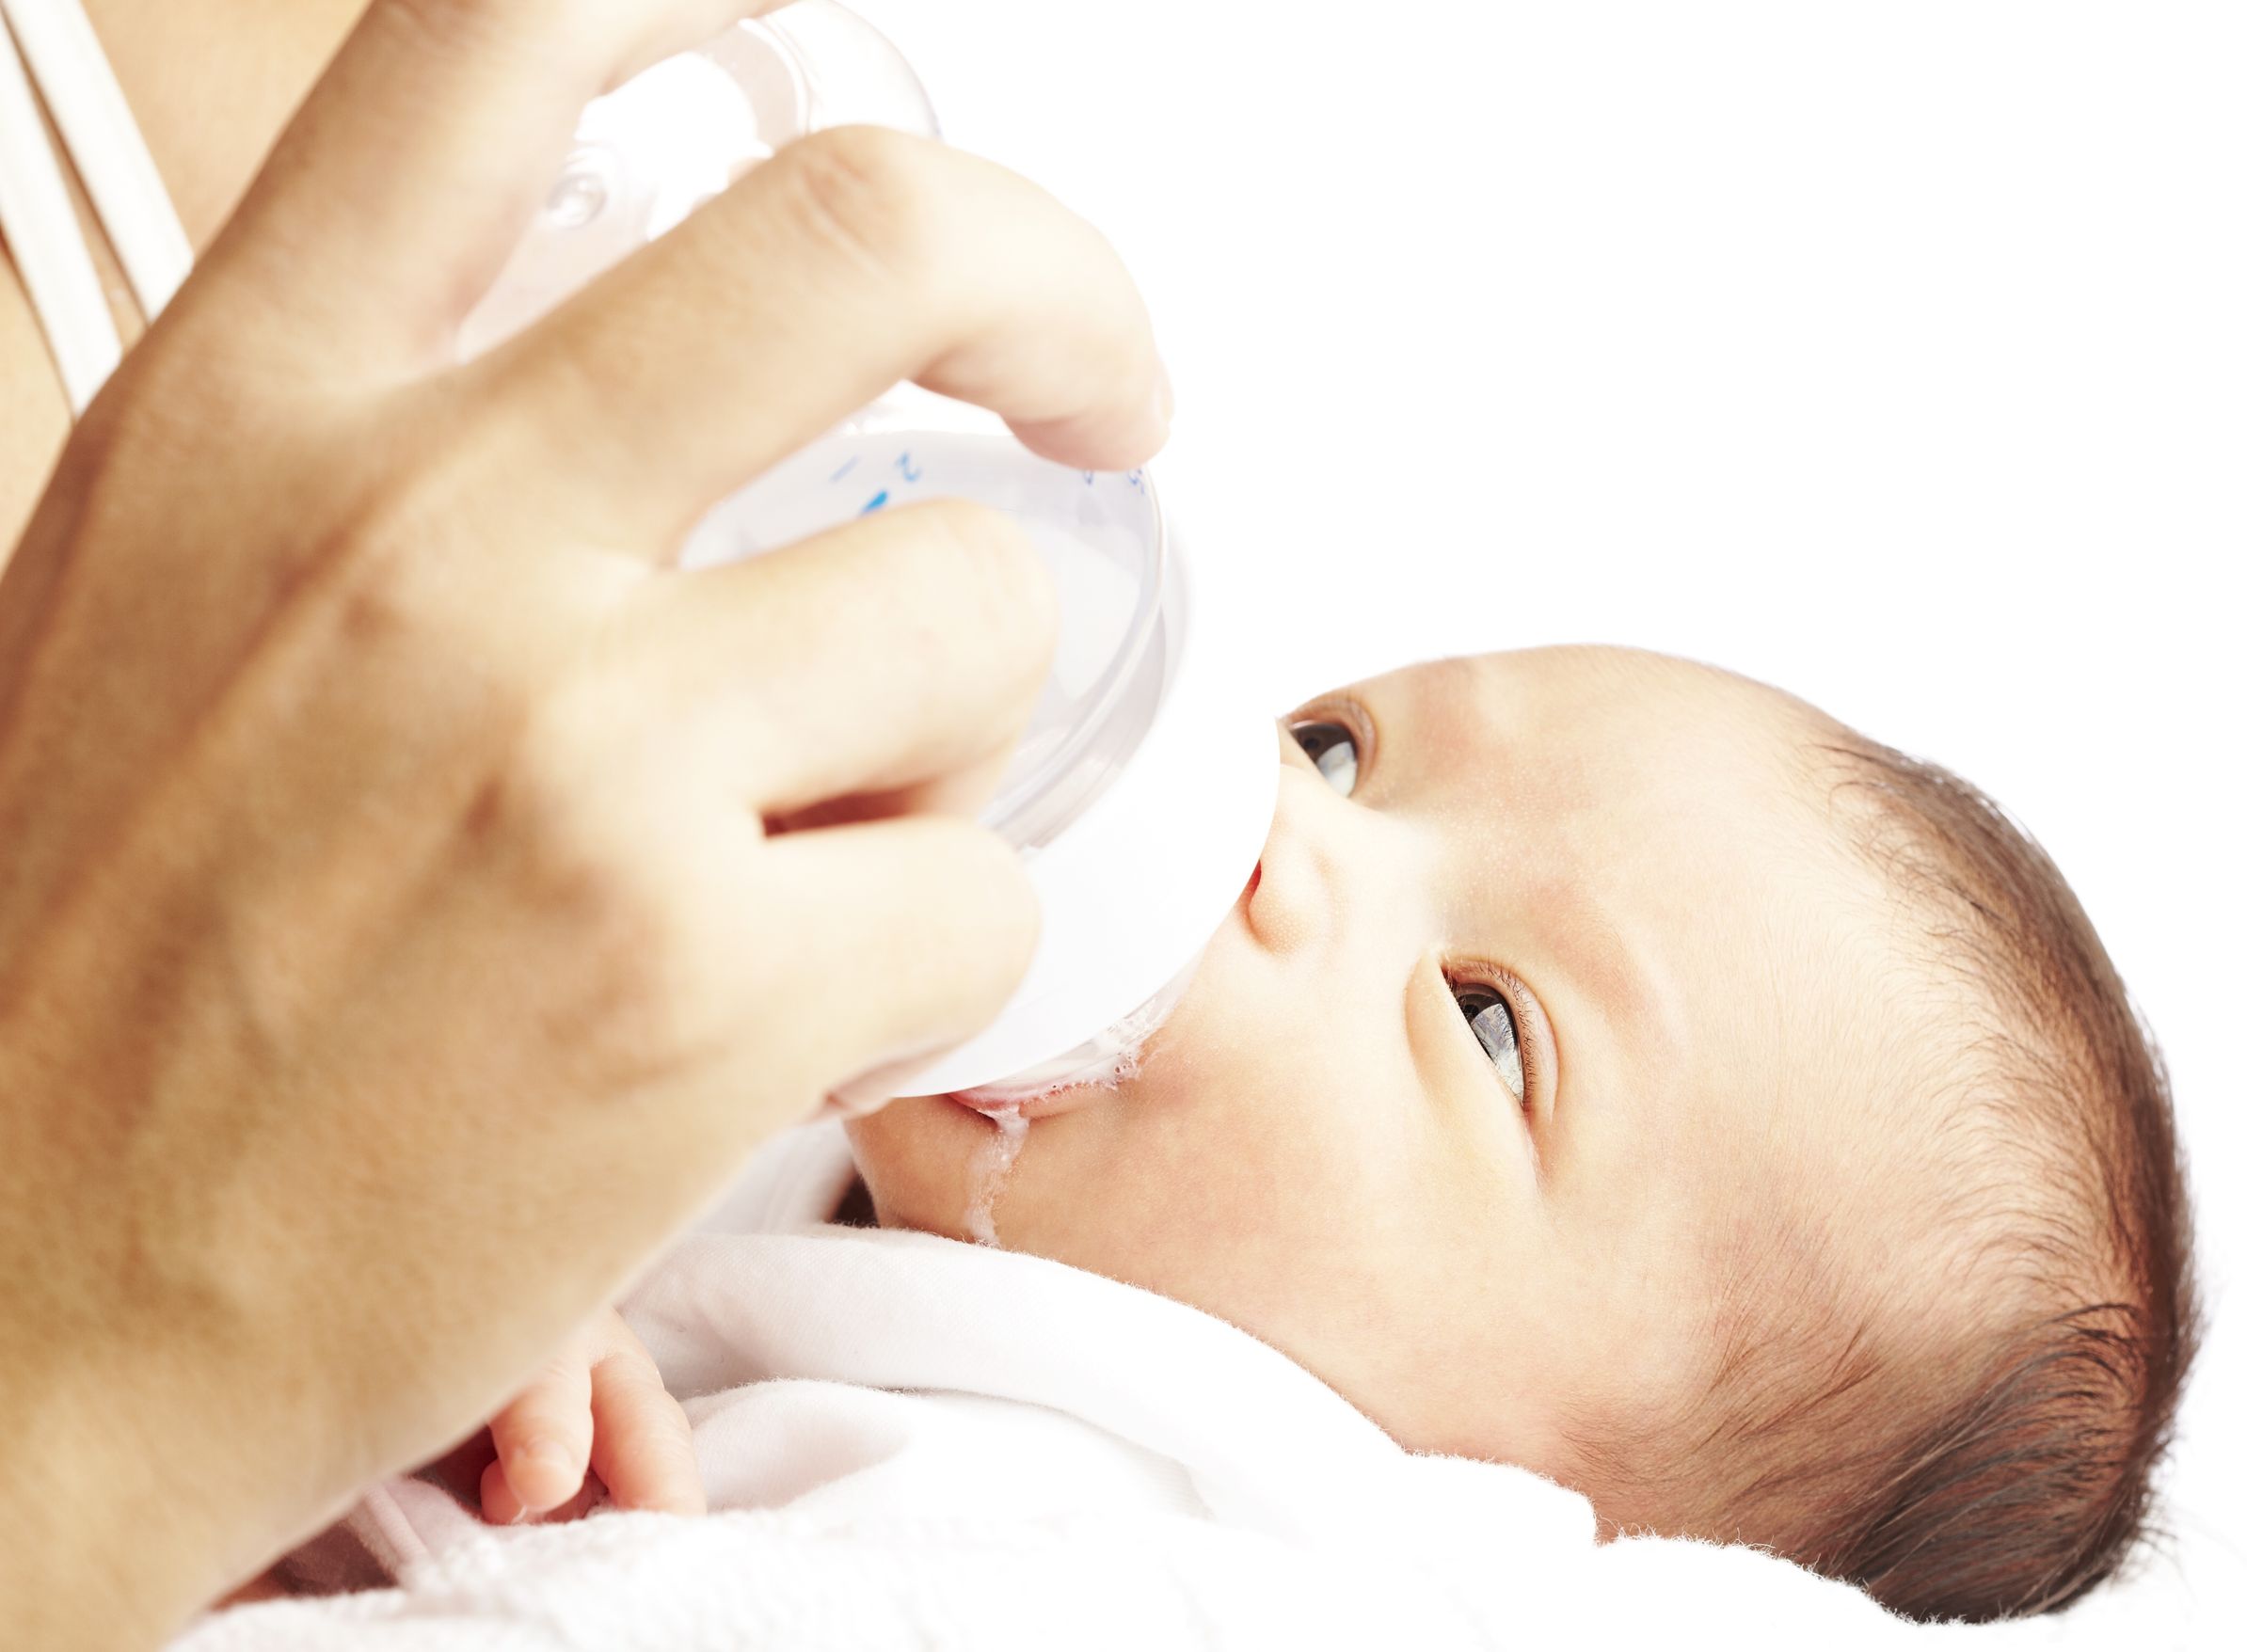 Taking Lactation Support Supplements for Post-Natal Health